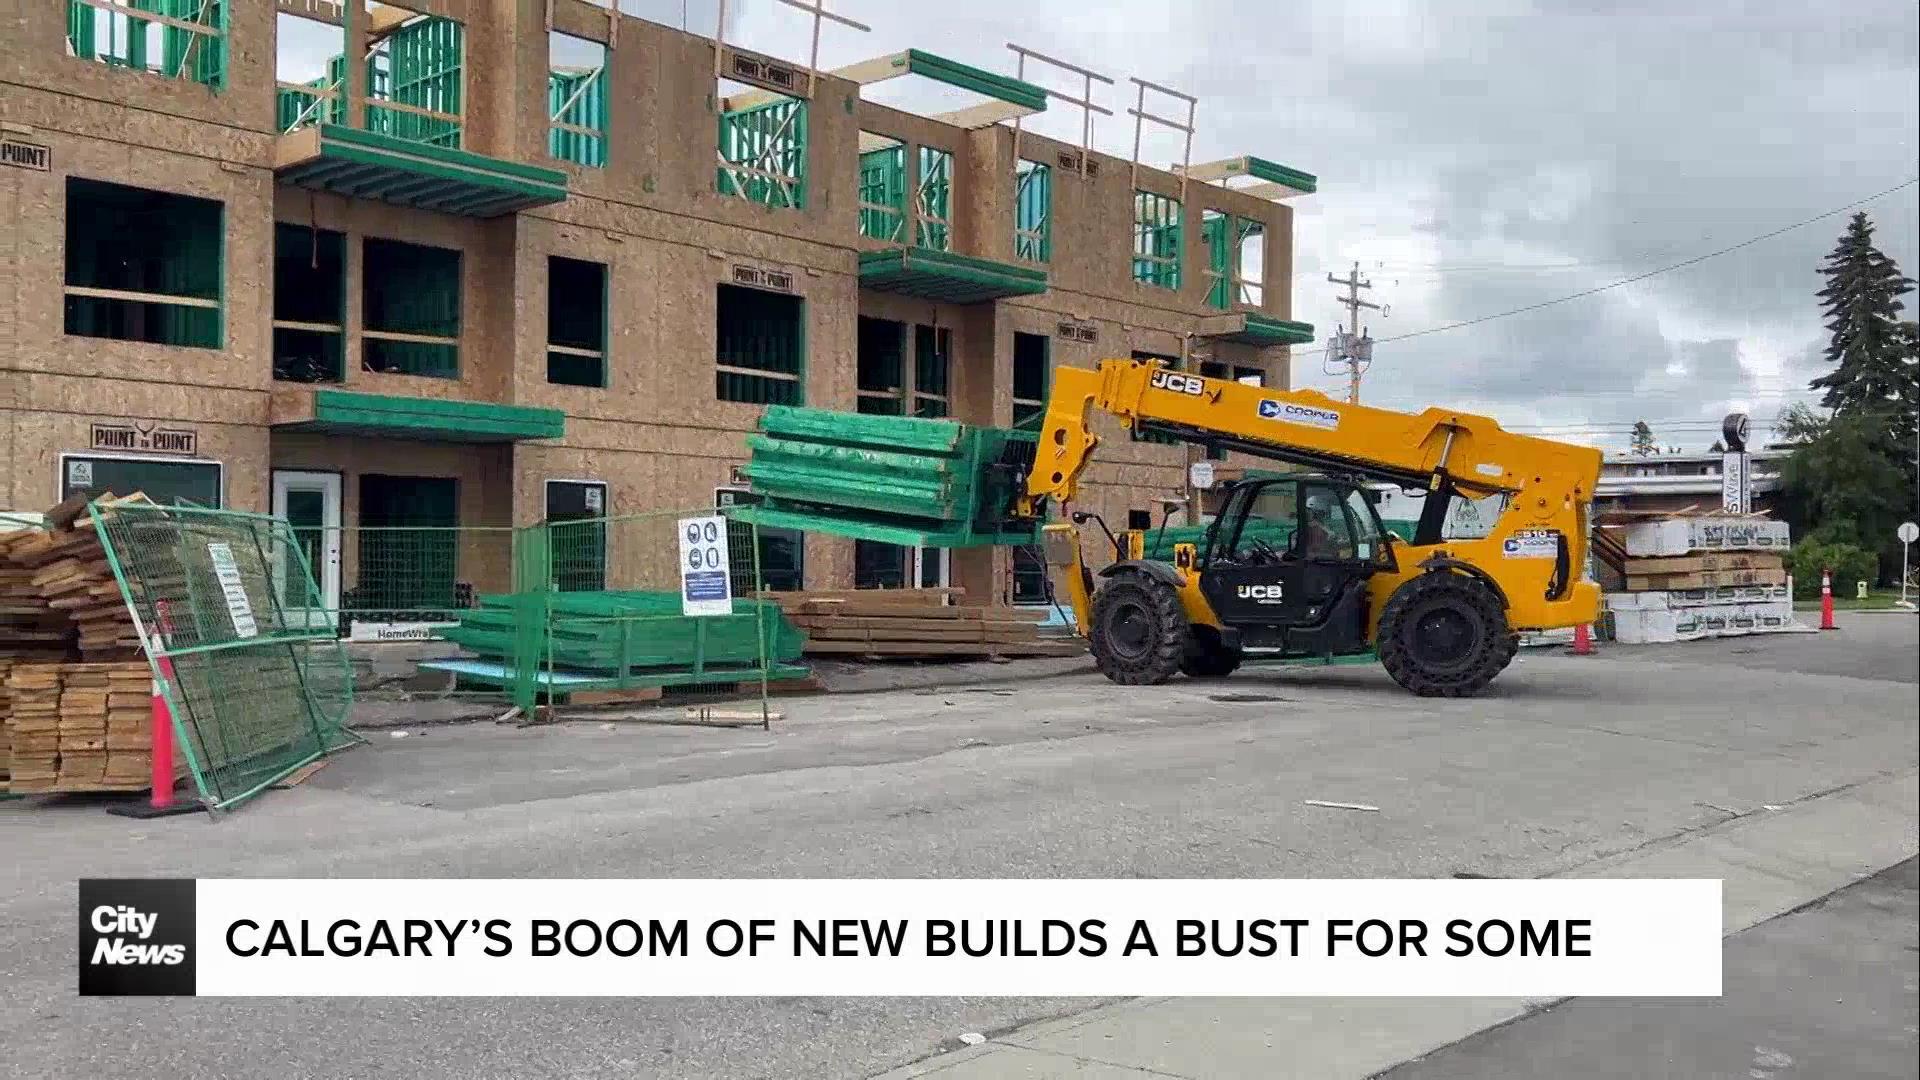 Calgary's boom of new builds a bust for some